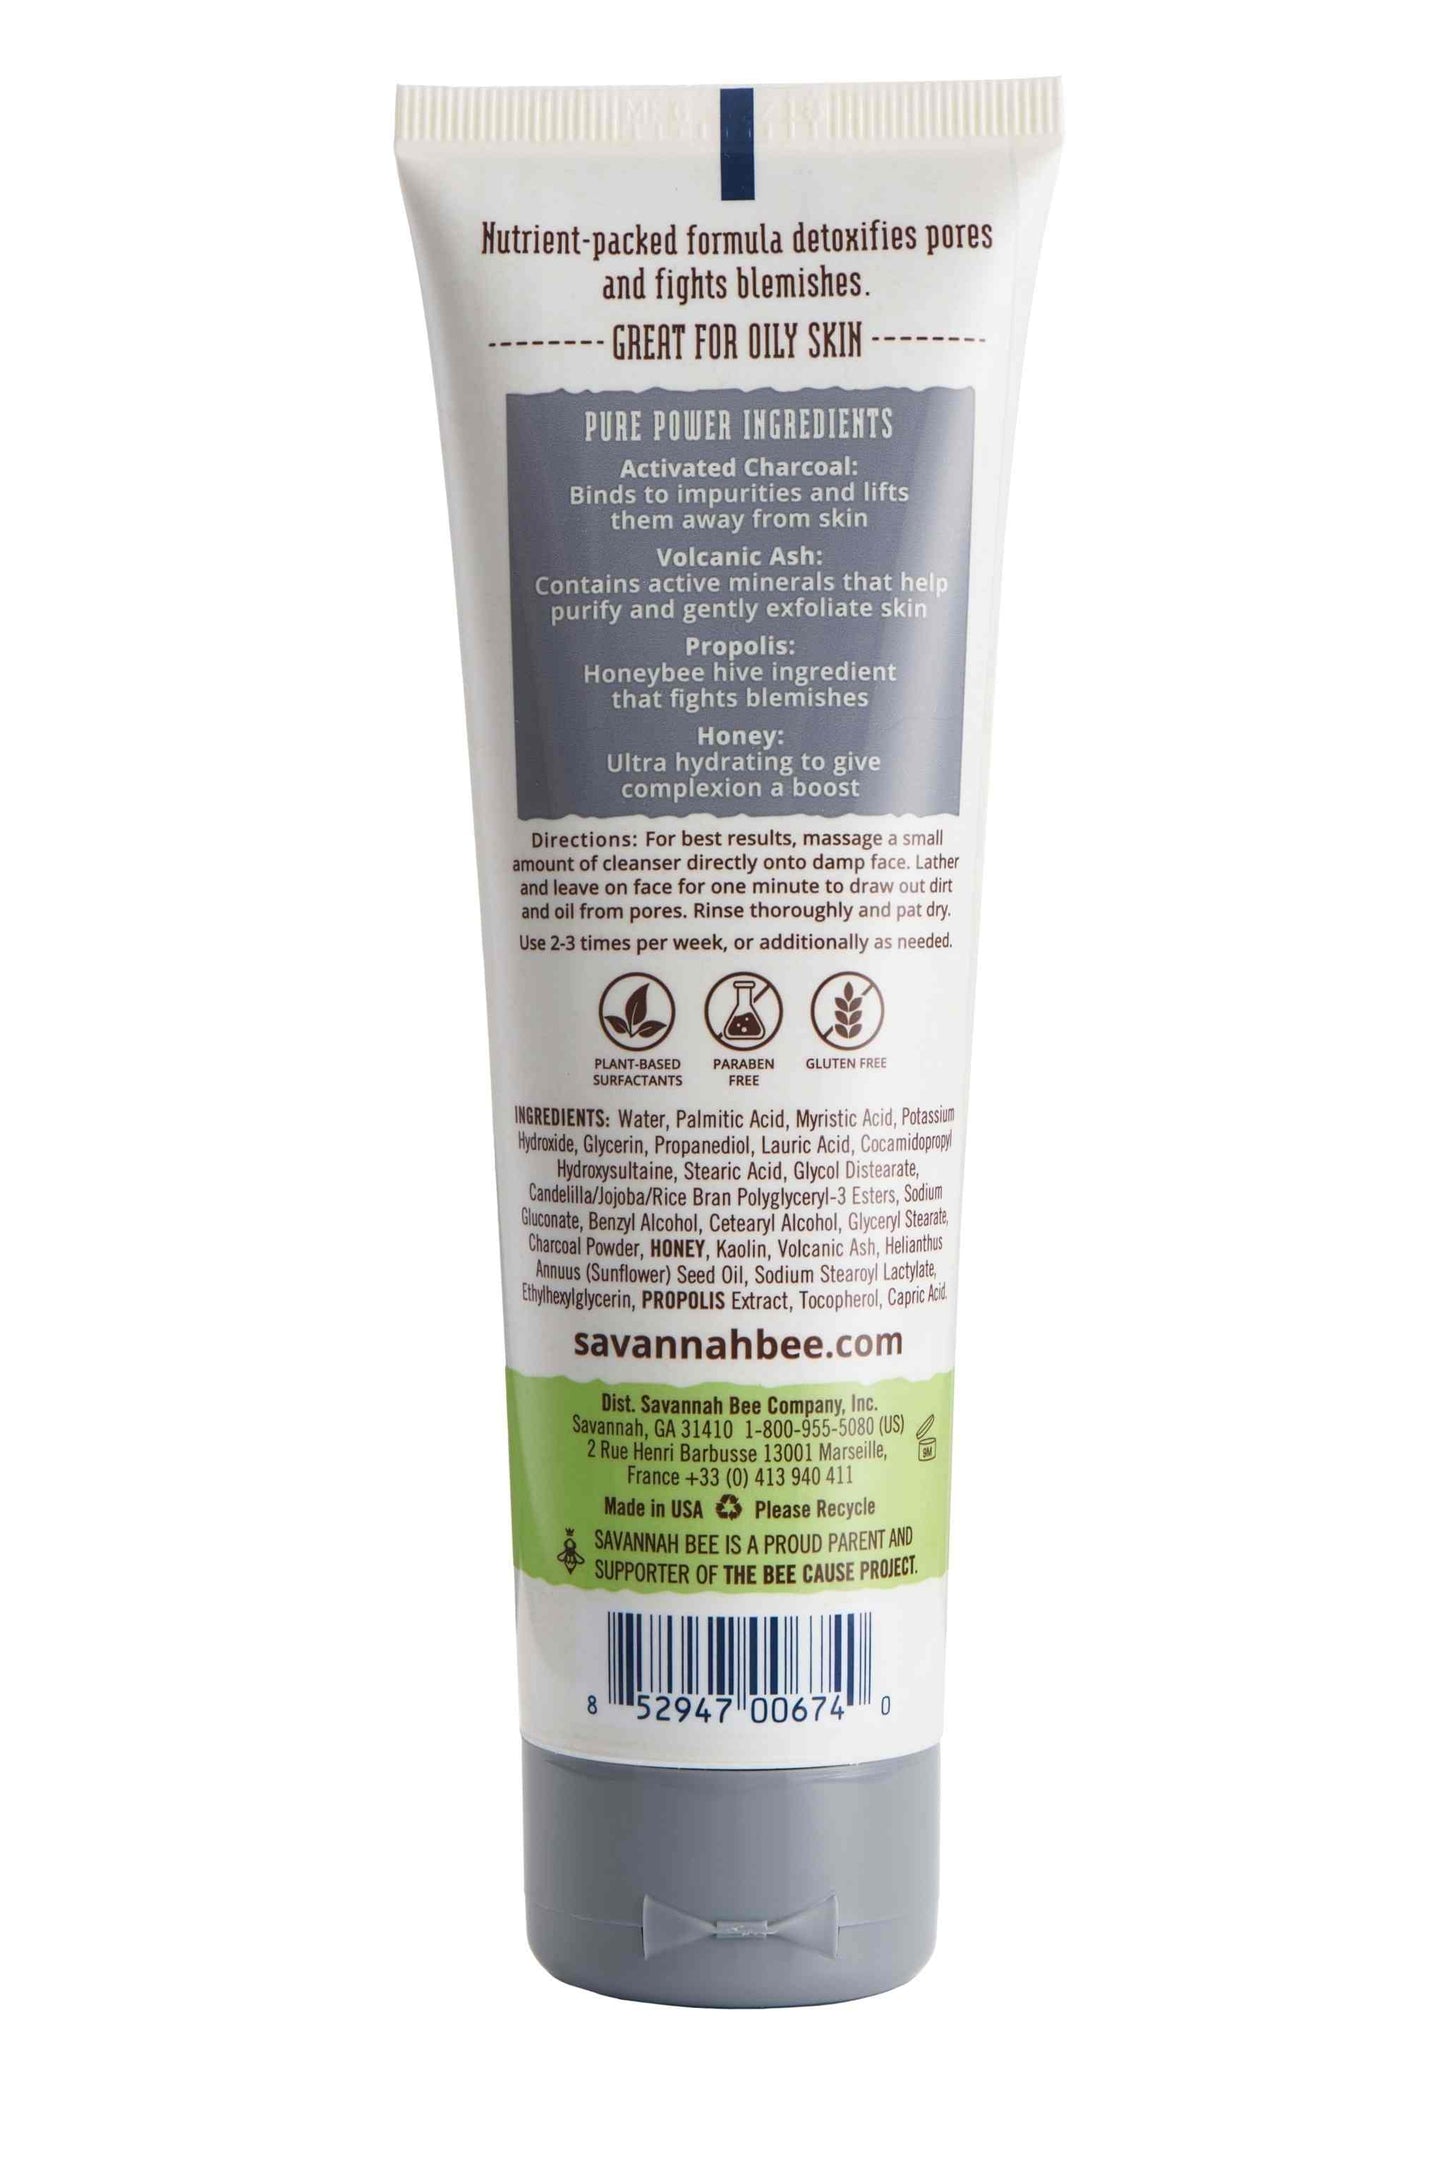 4 ounce tube of Activated Charcoal facial cleanser back of package